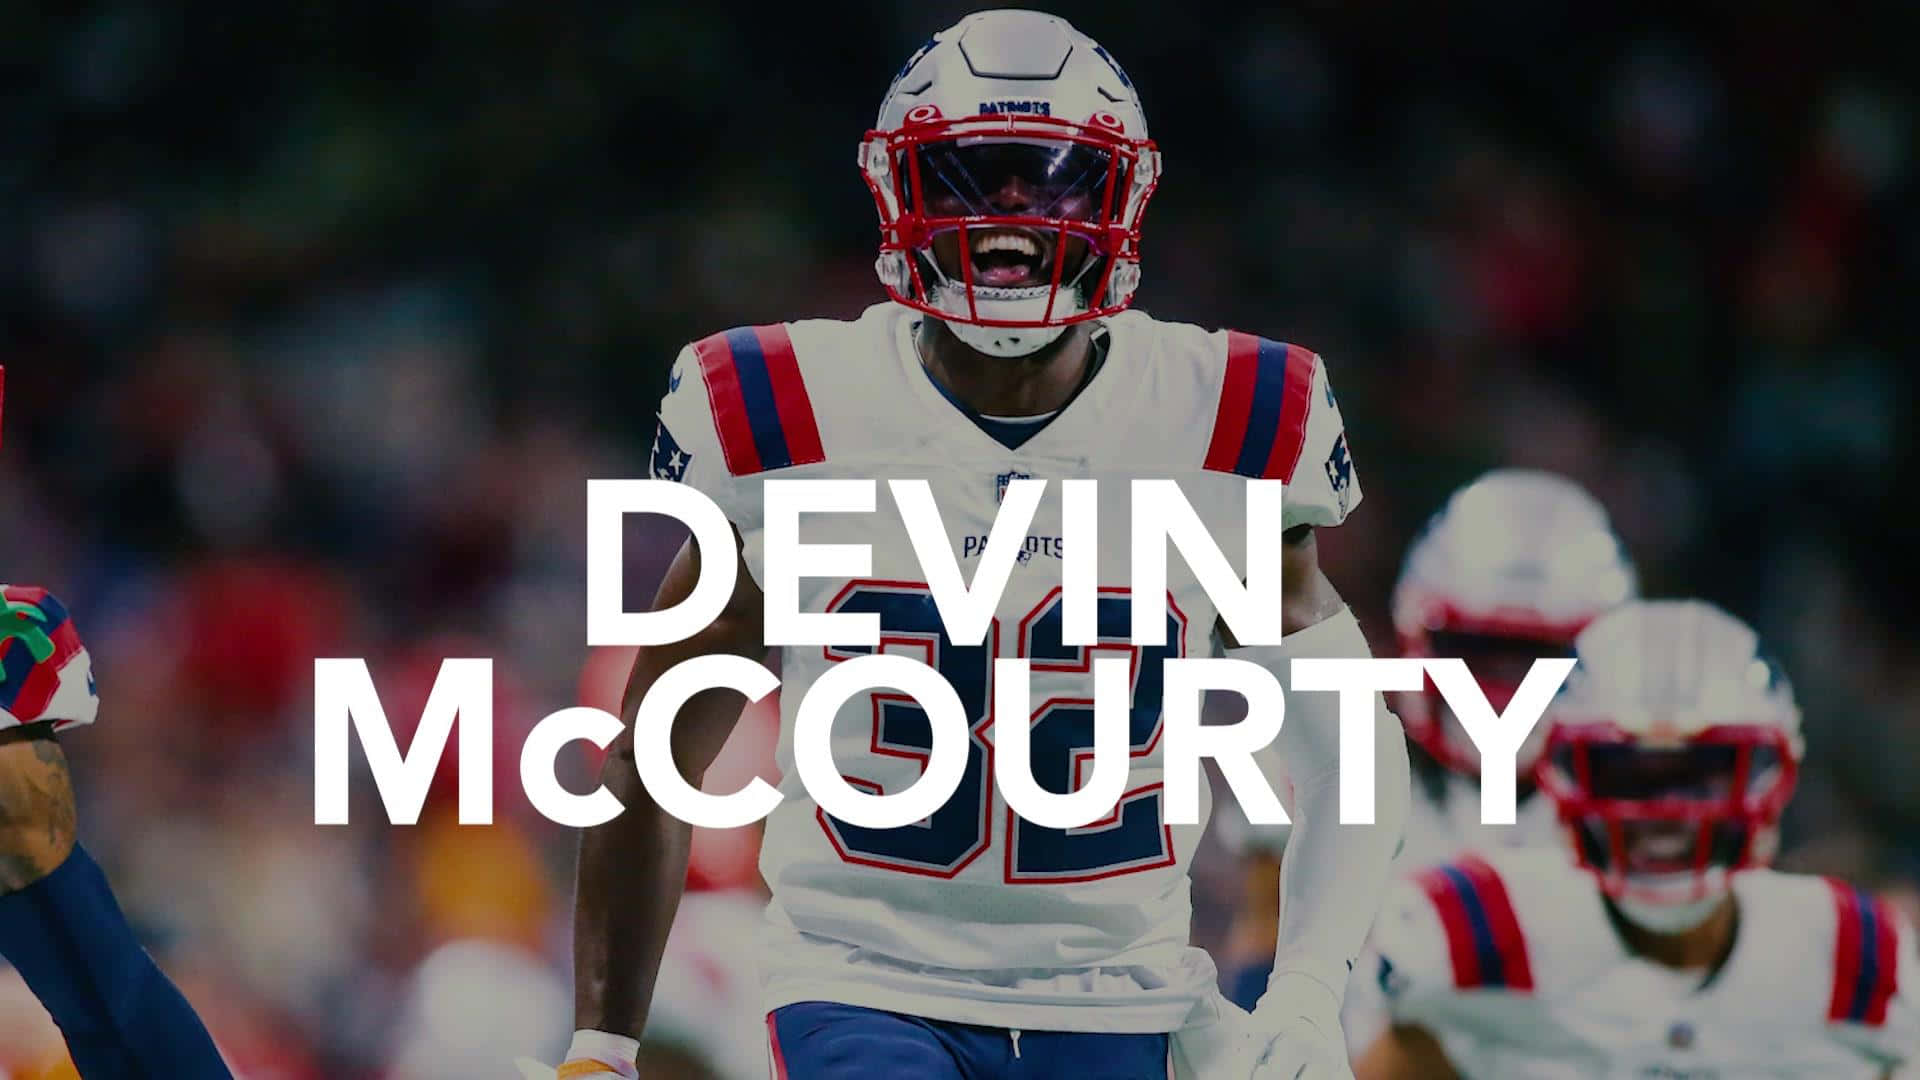 New England Patriots' Devin McCourty in action Wallpaper